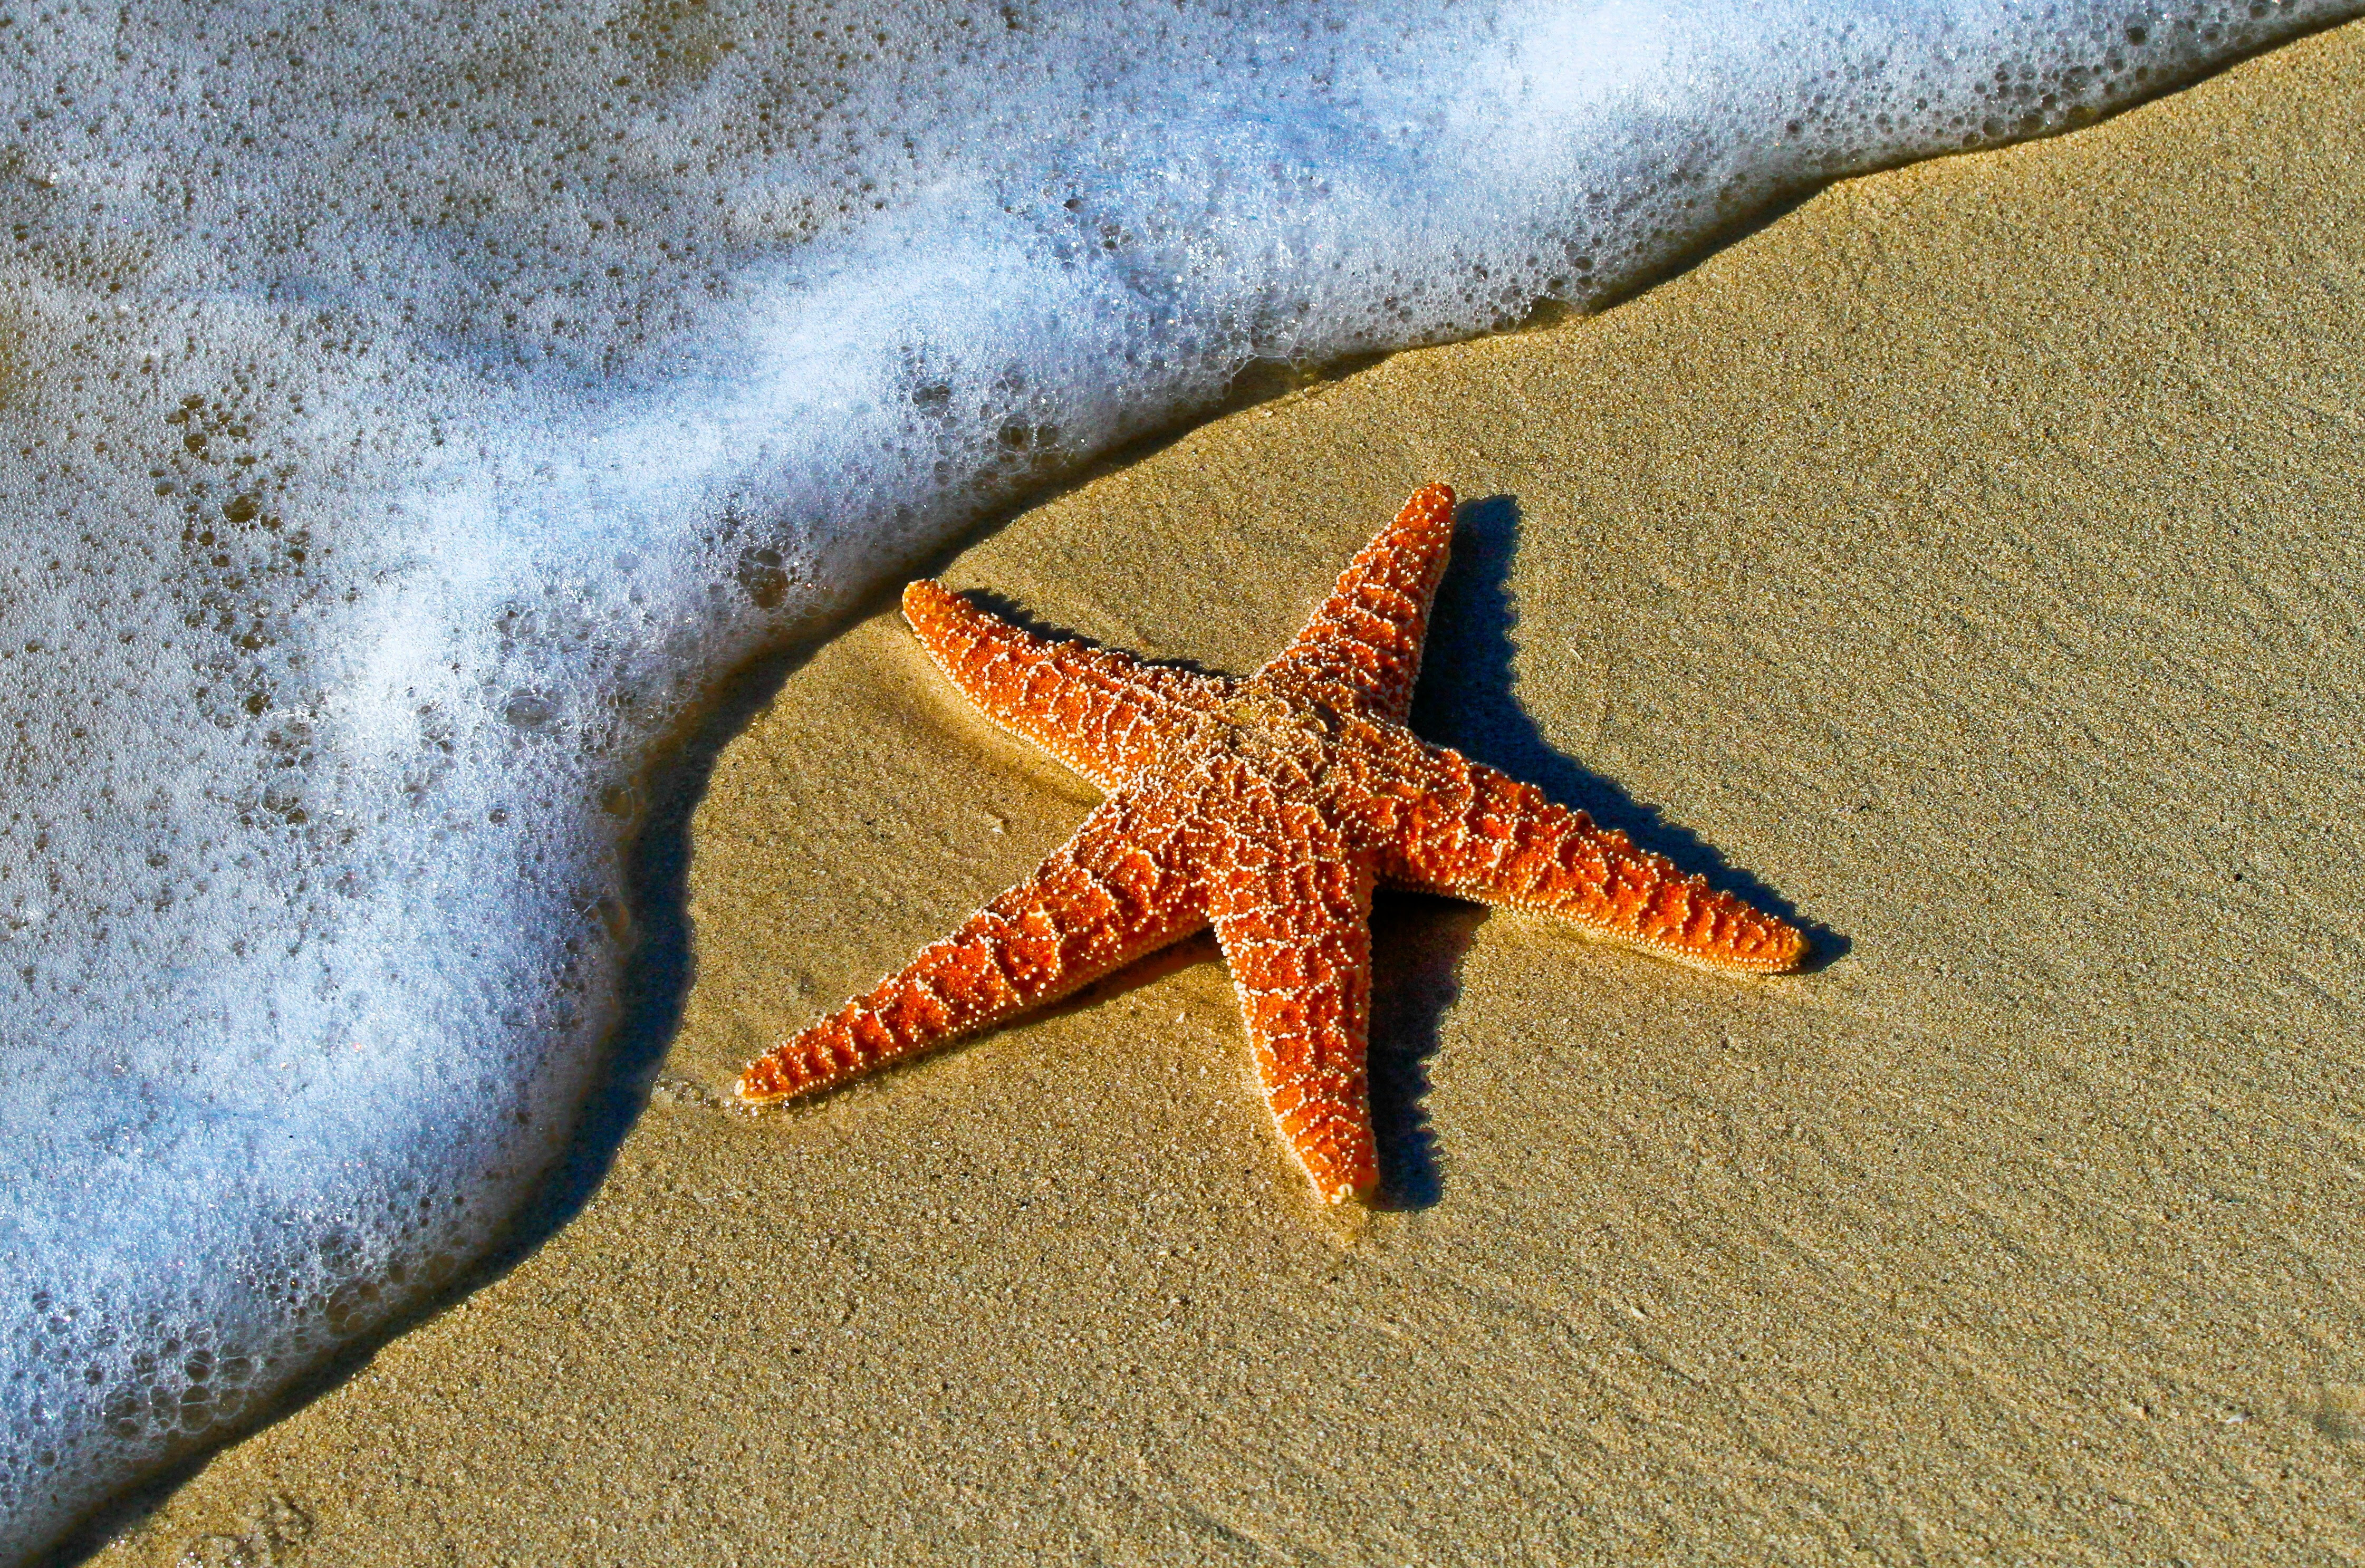 A single orange starfish with five arms on a sand beach with foamy water rolling up the beach. Photo by Pedro Lastra via Unsplash.